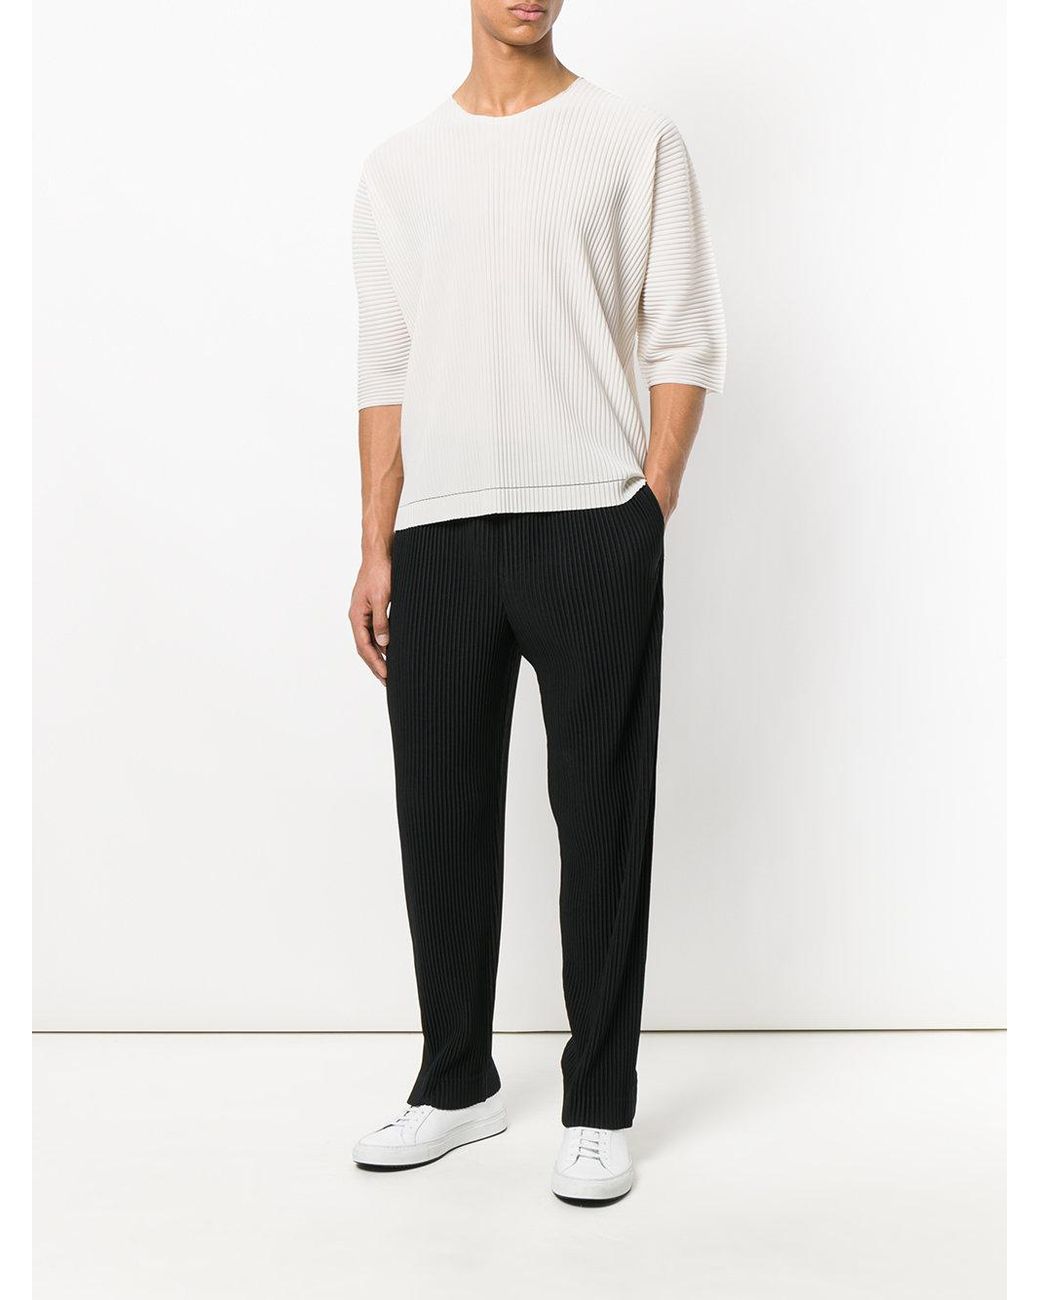 Gray Tailored Pleats 1 Trousers by Homme Plissé Issey Miyake on Sale